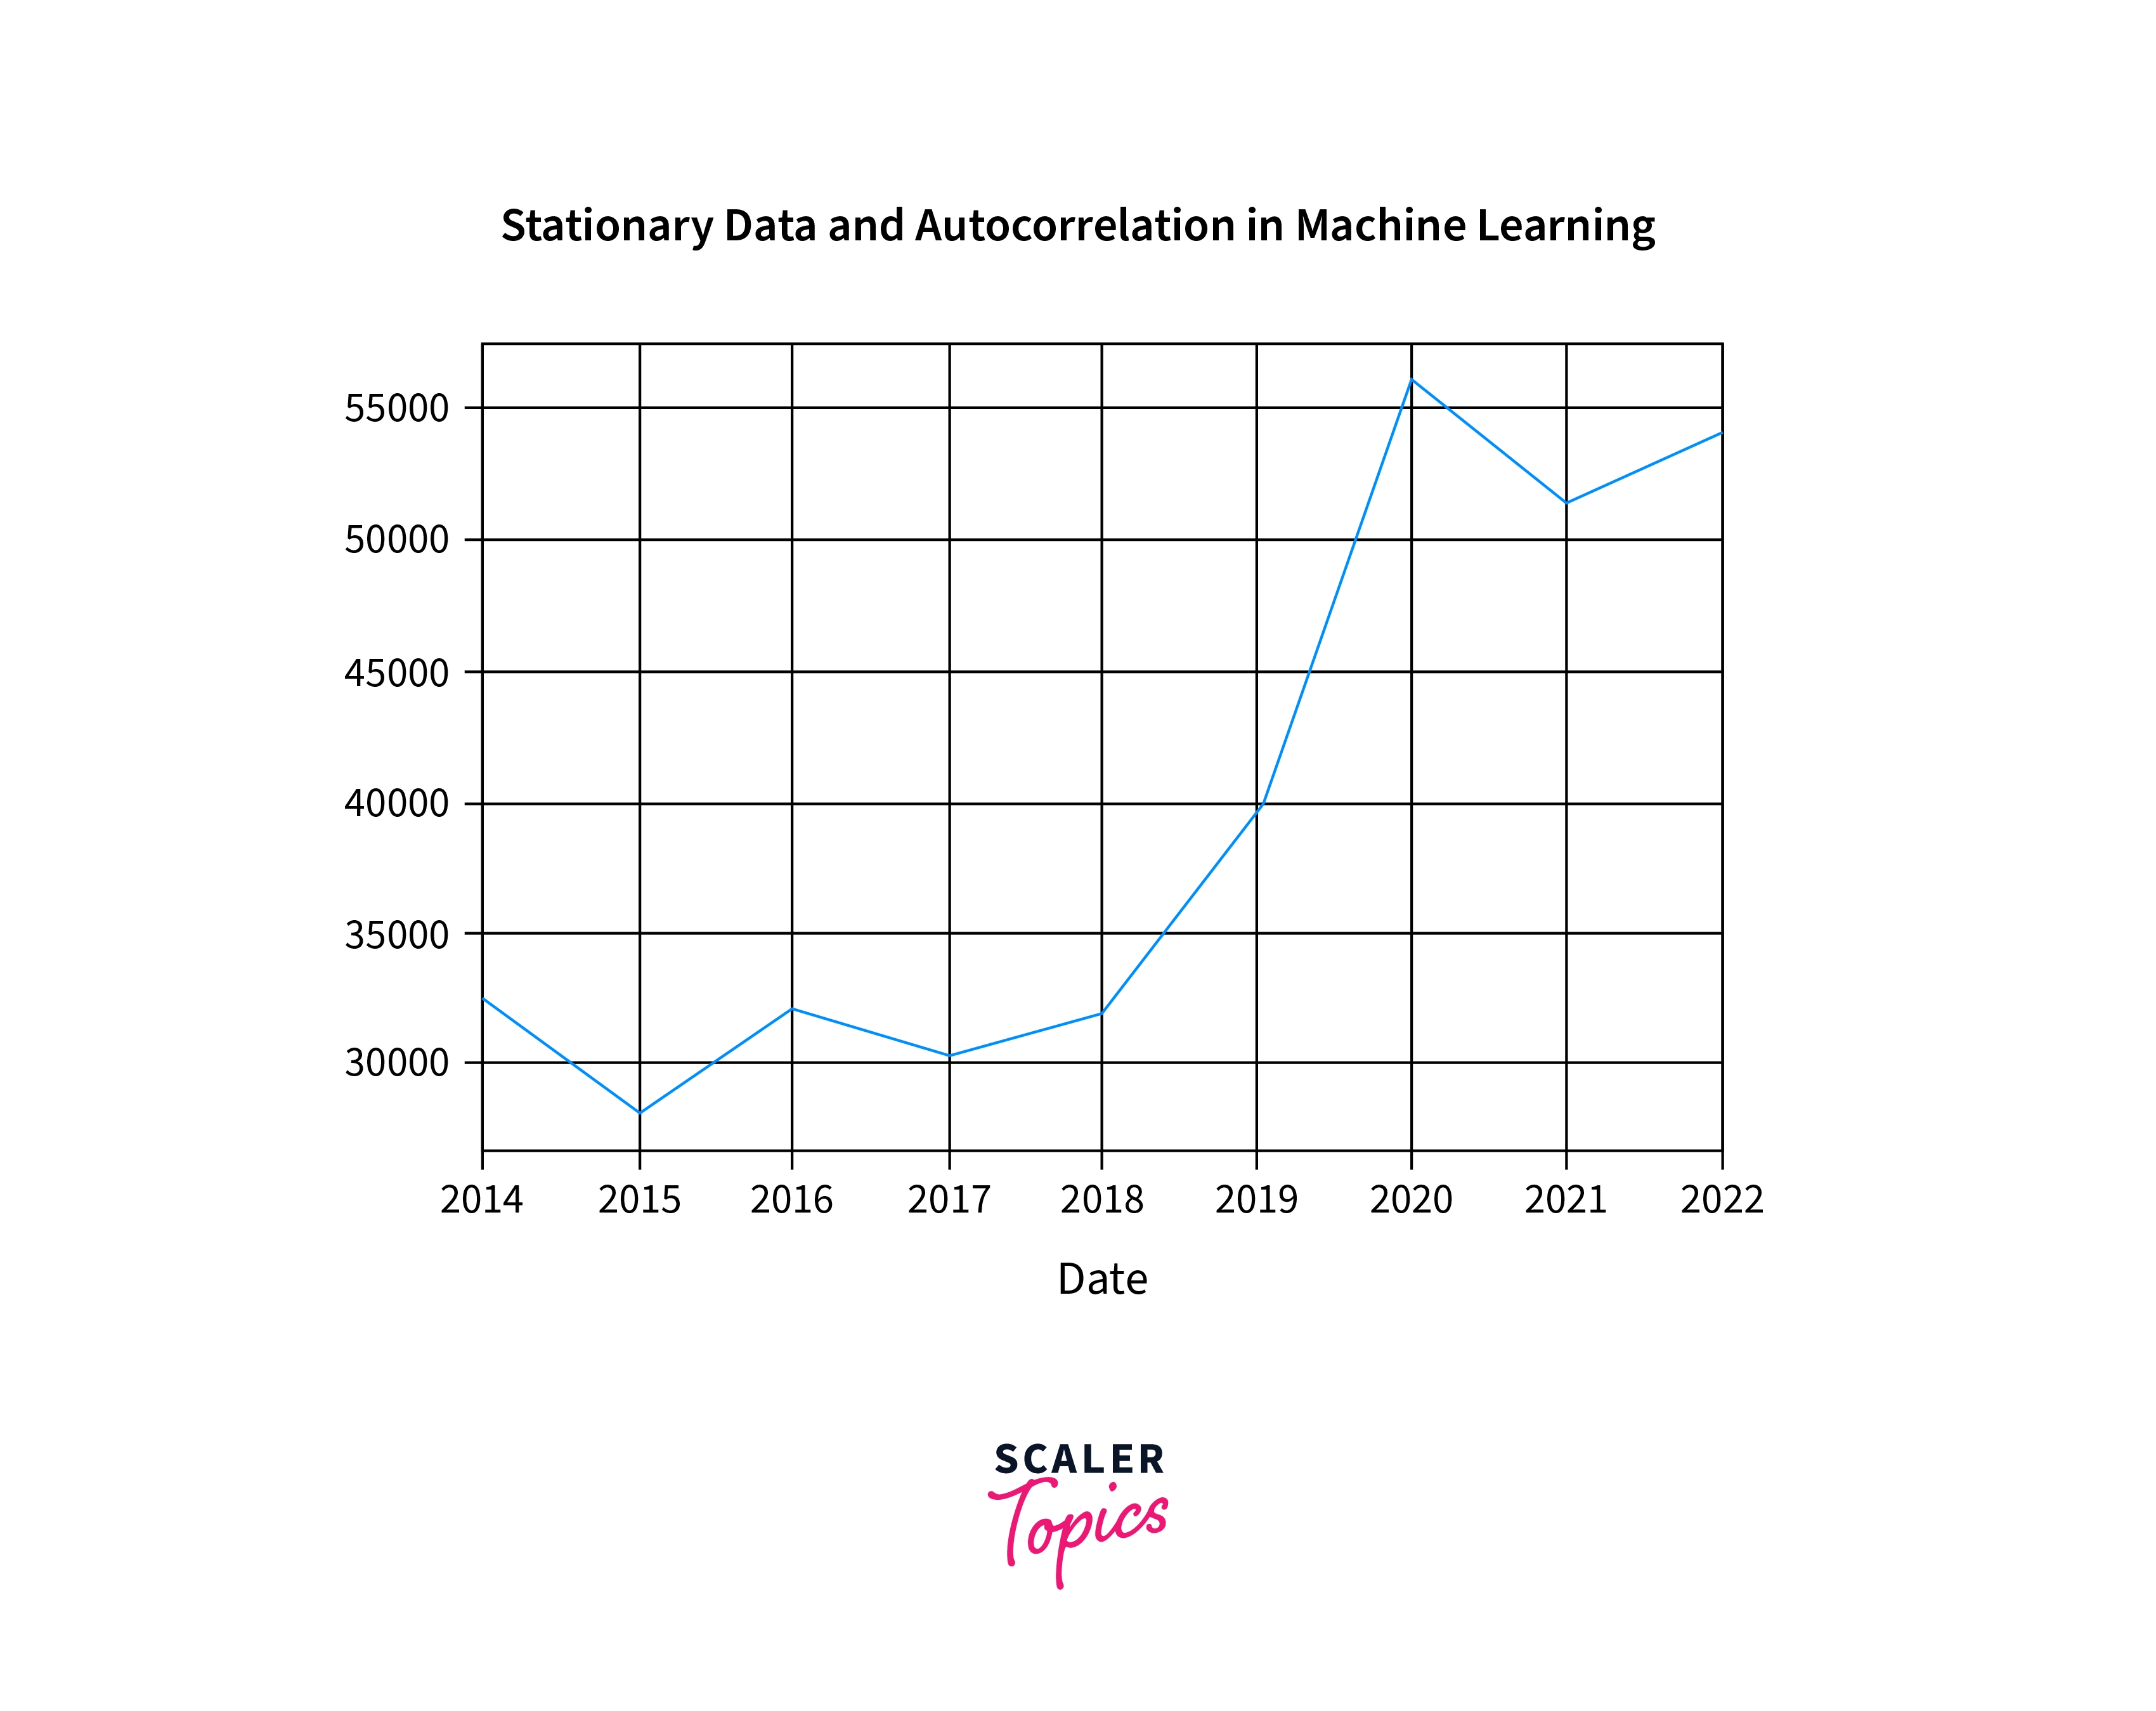 stationary data and autocorrelation in machine learning